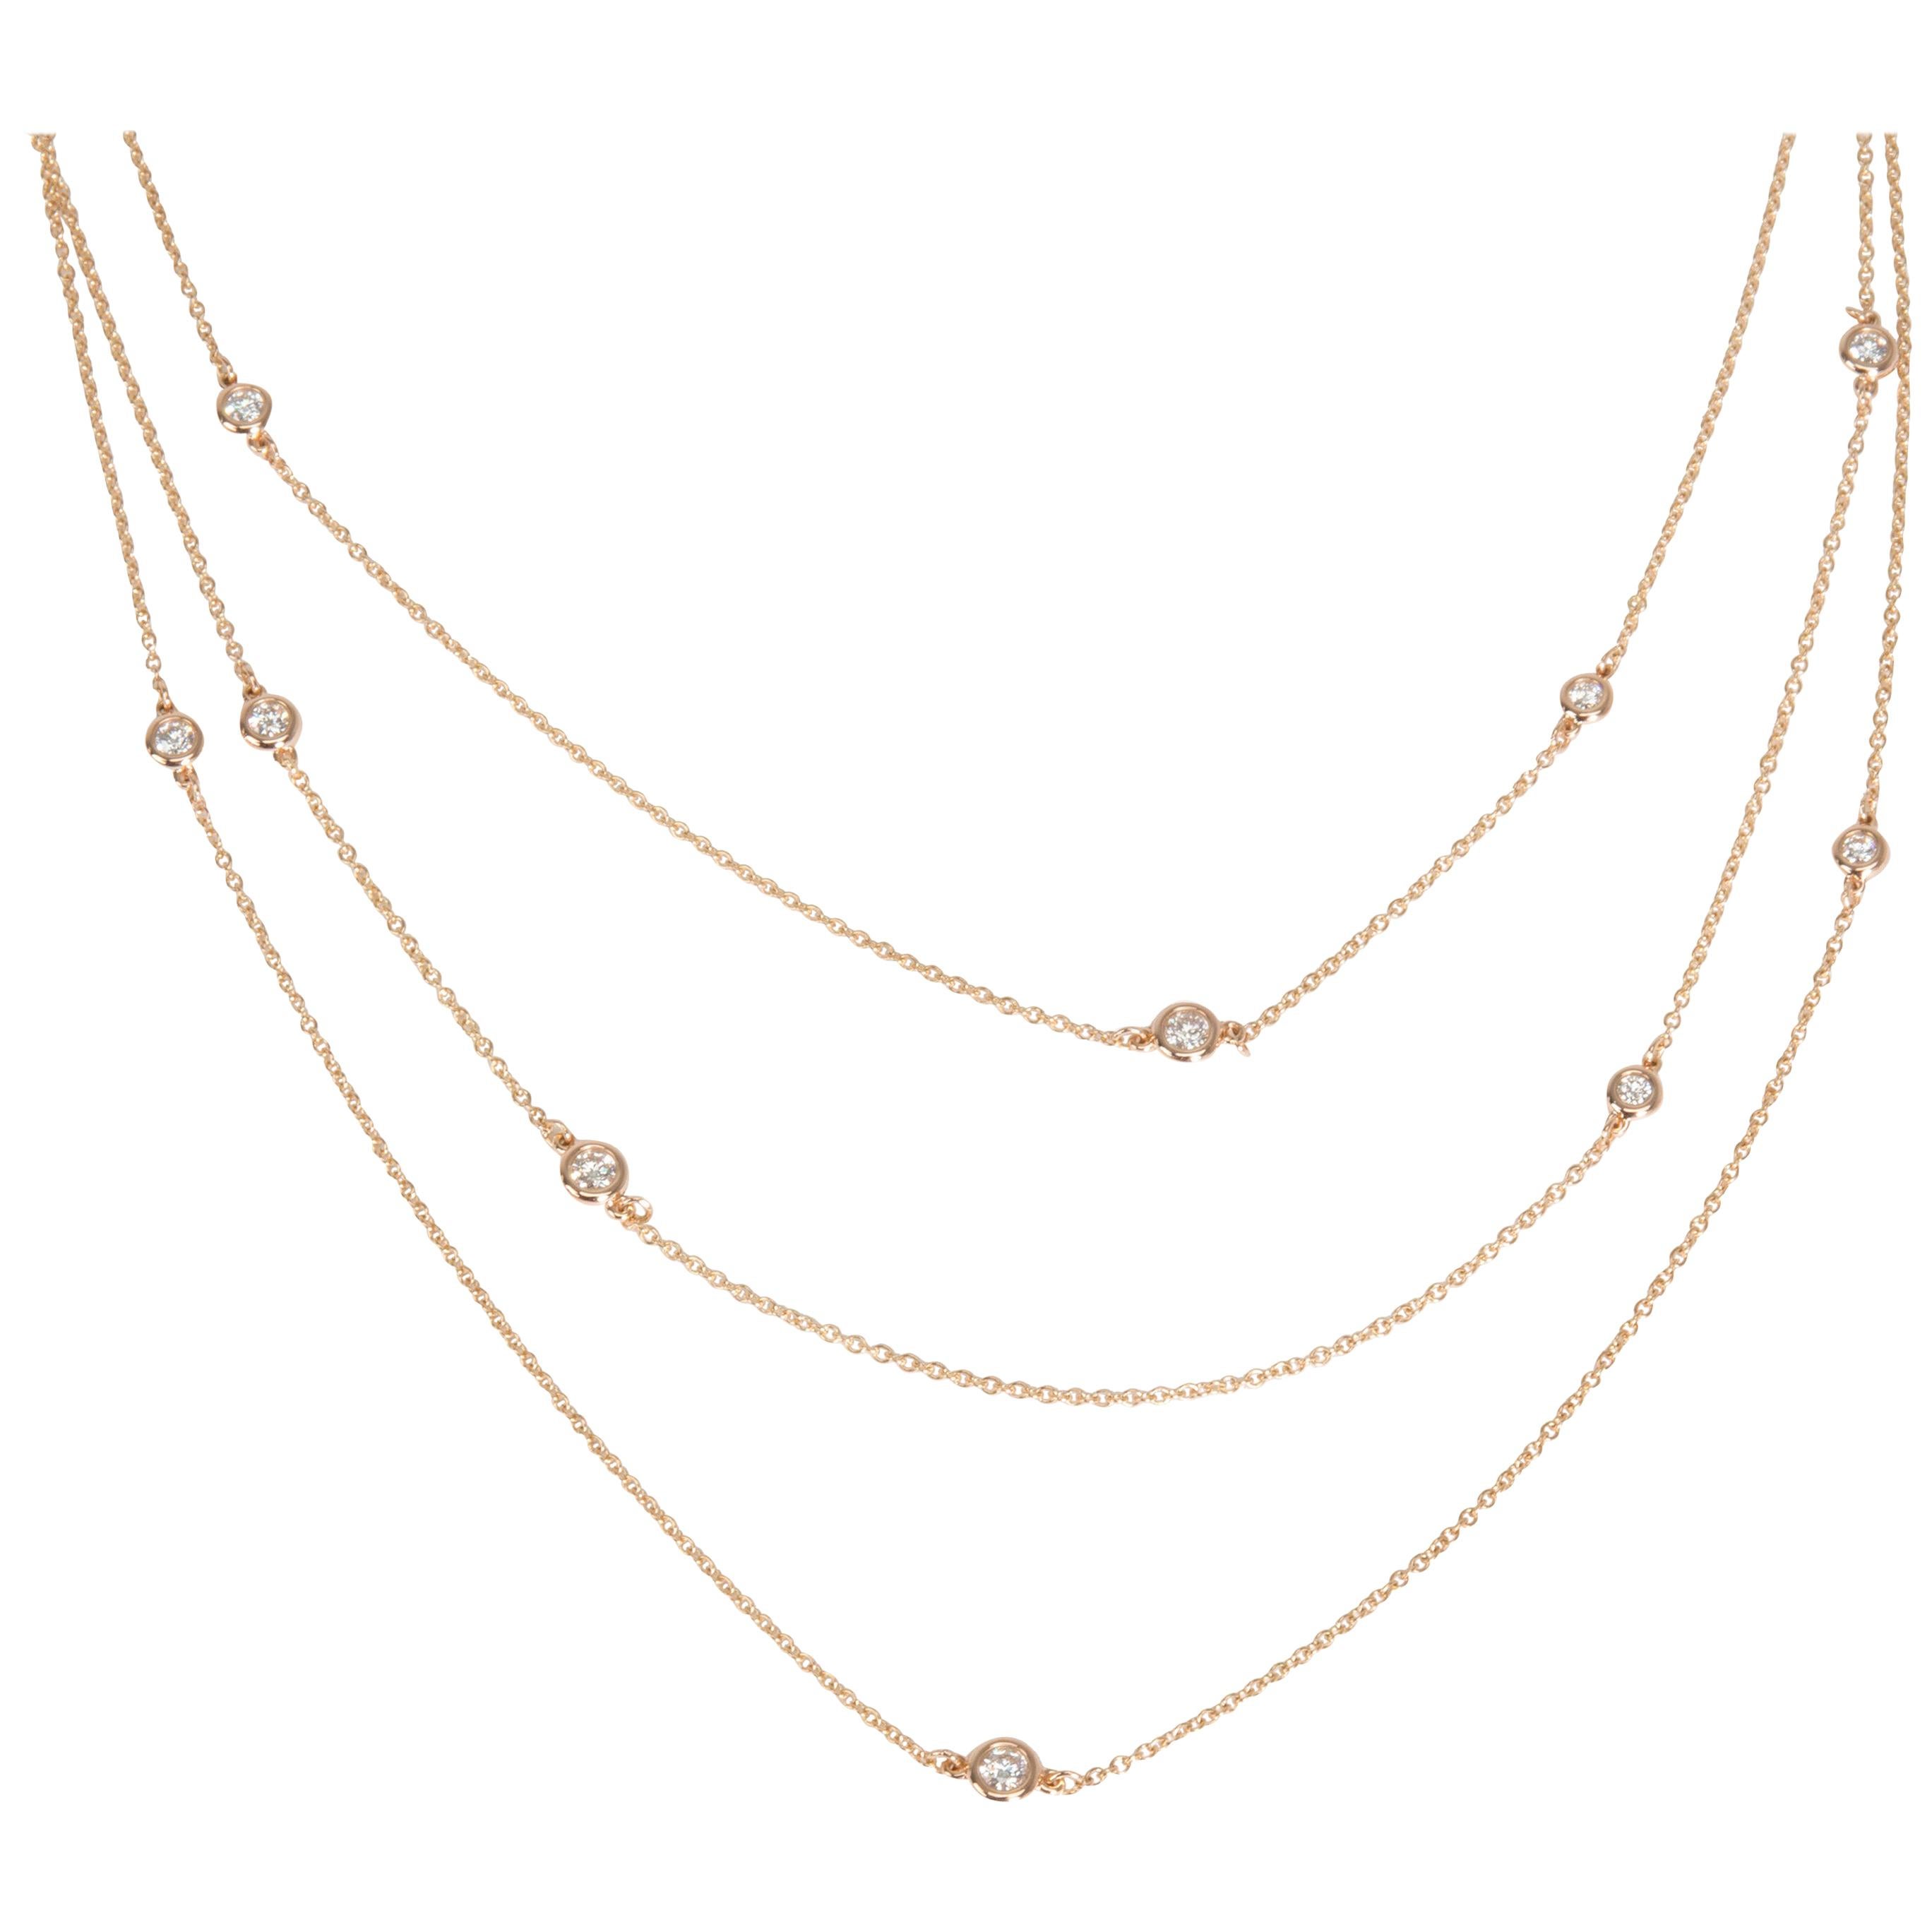 Tiffany & Co. Elsa Peretti Diamonds by the Yard 18k Rose Gold Necklace 1.20ctw